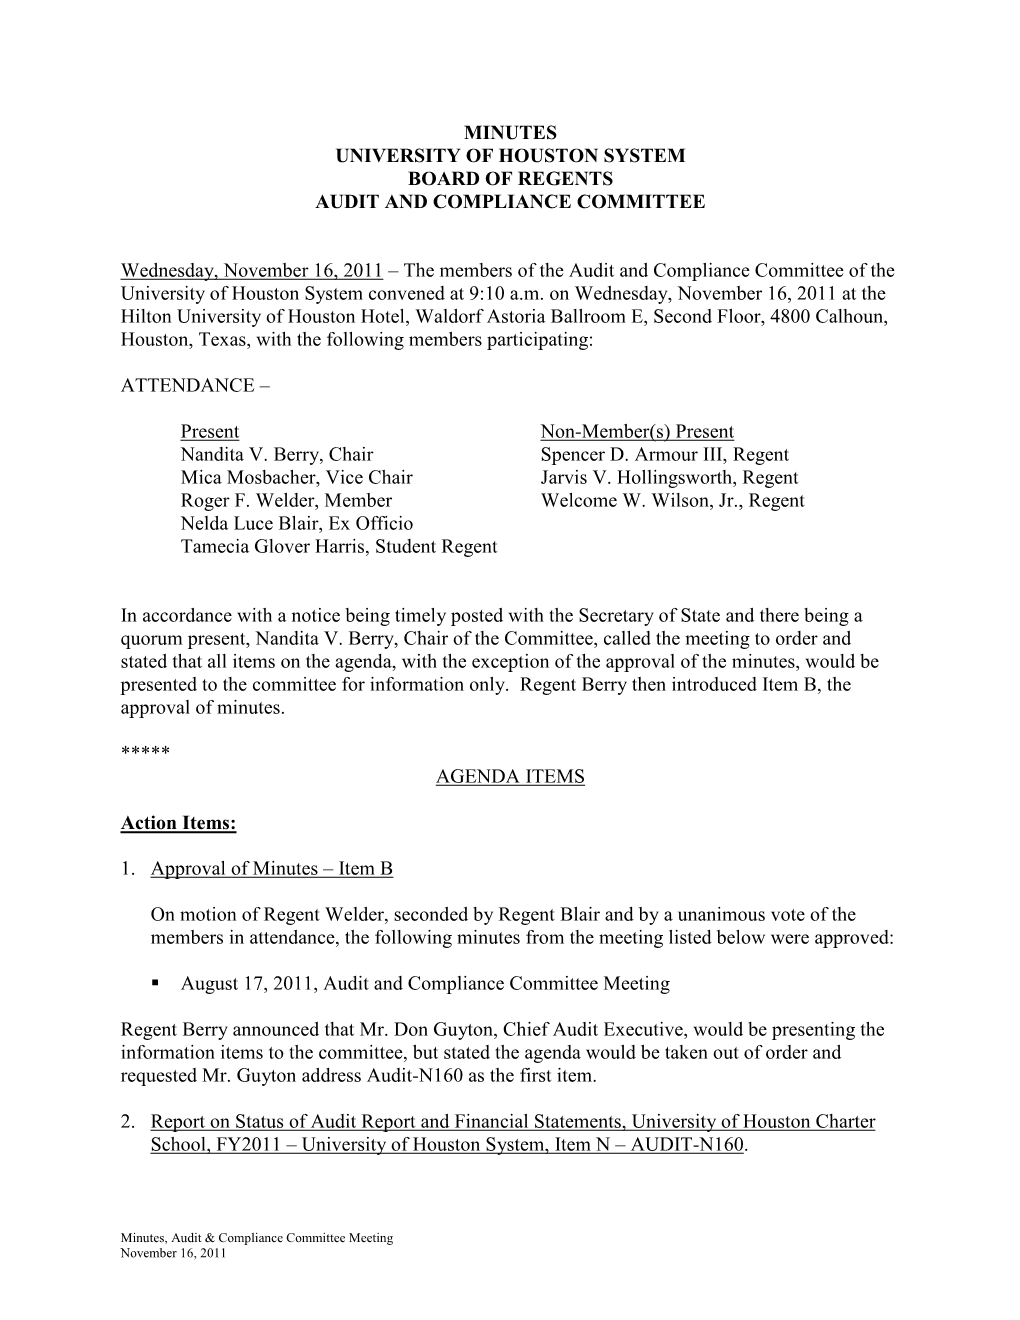 Minutes University of Houston System Board of Regents Audit and Compliance Committee